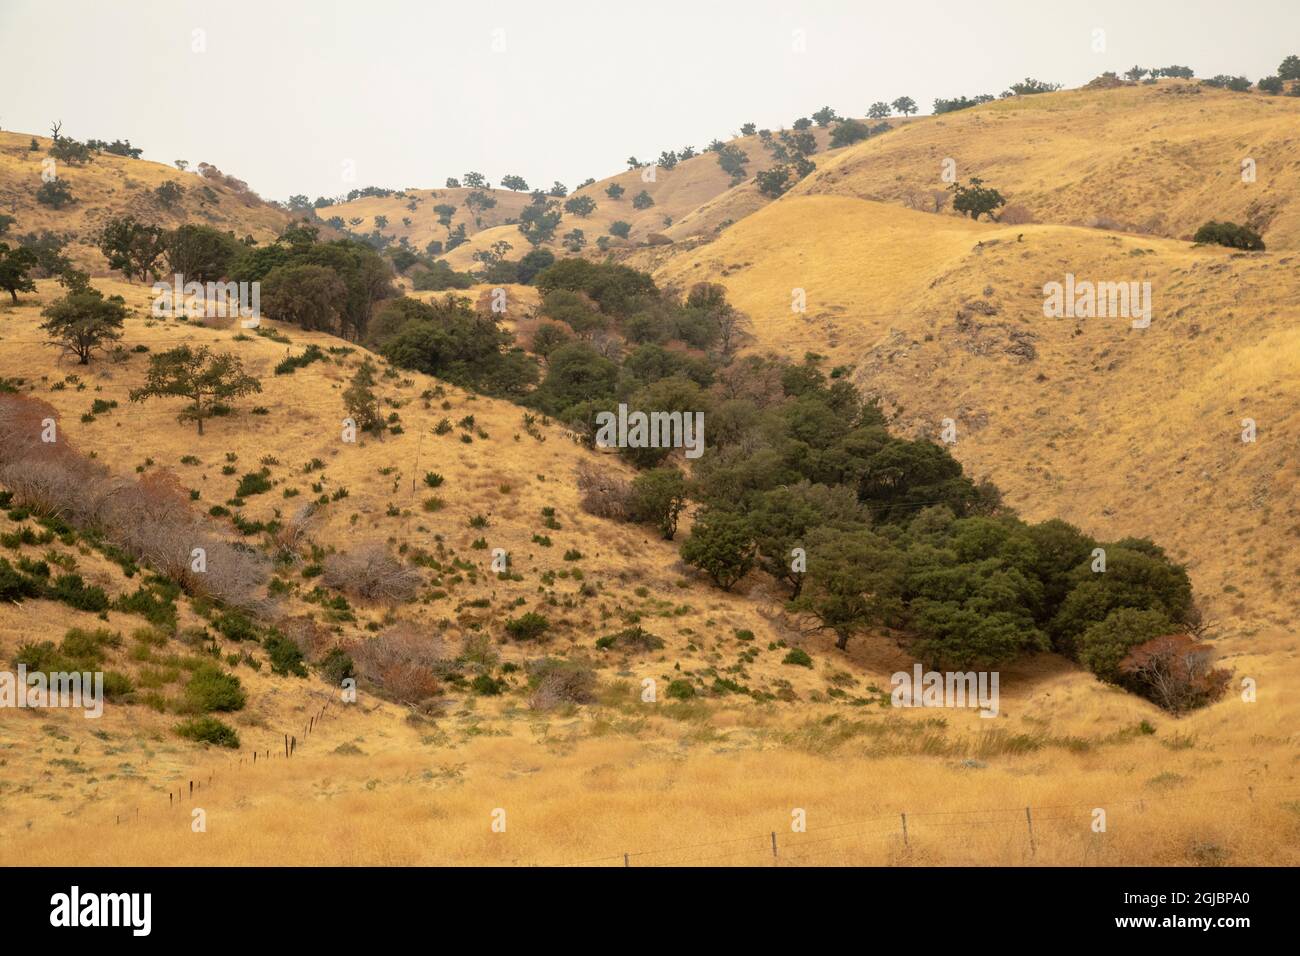 USA, California, Kern County. Landscape of valley and hills. Stock Photo